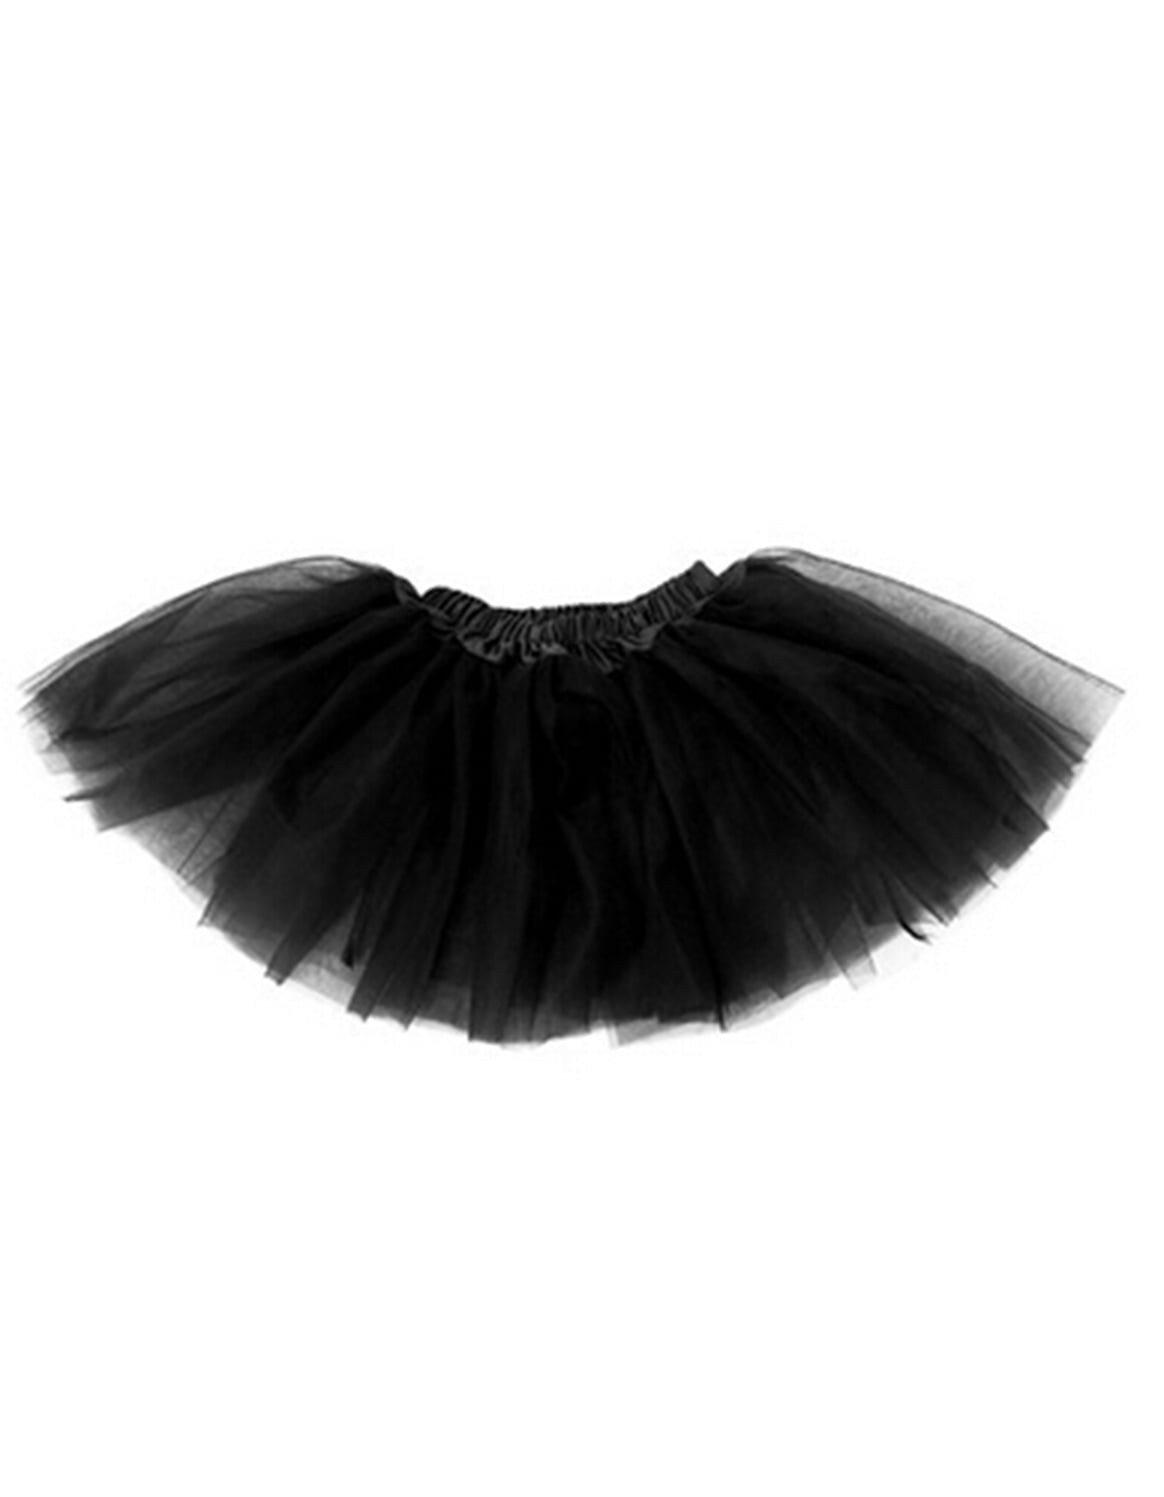 dress up tutus for toddlers